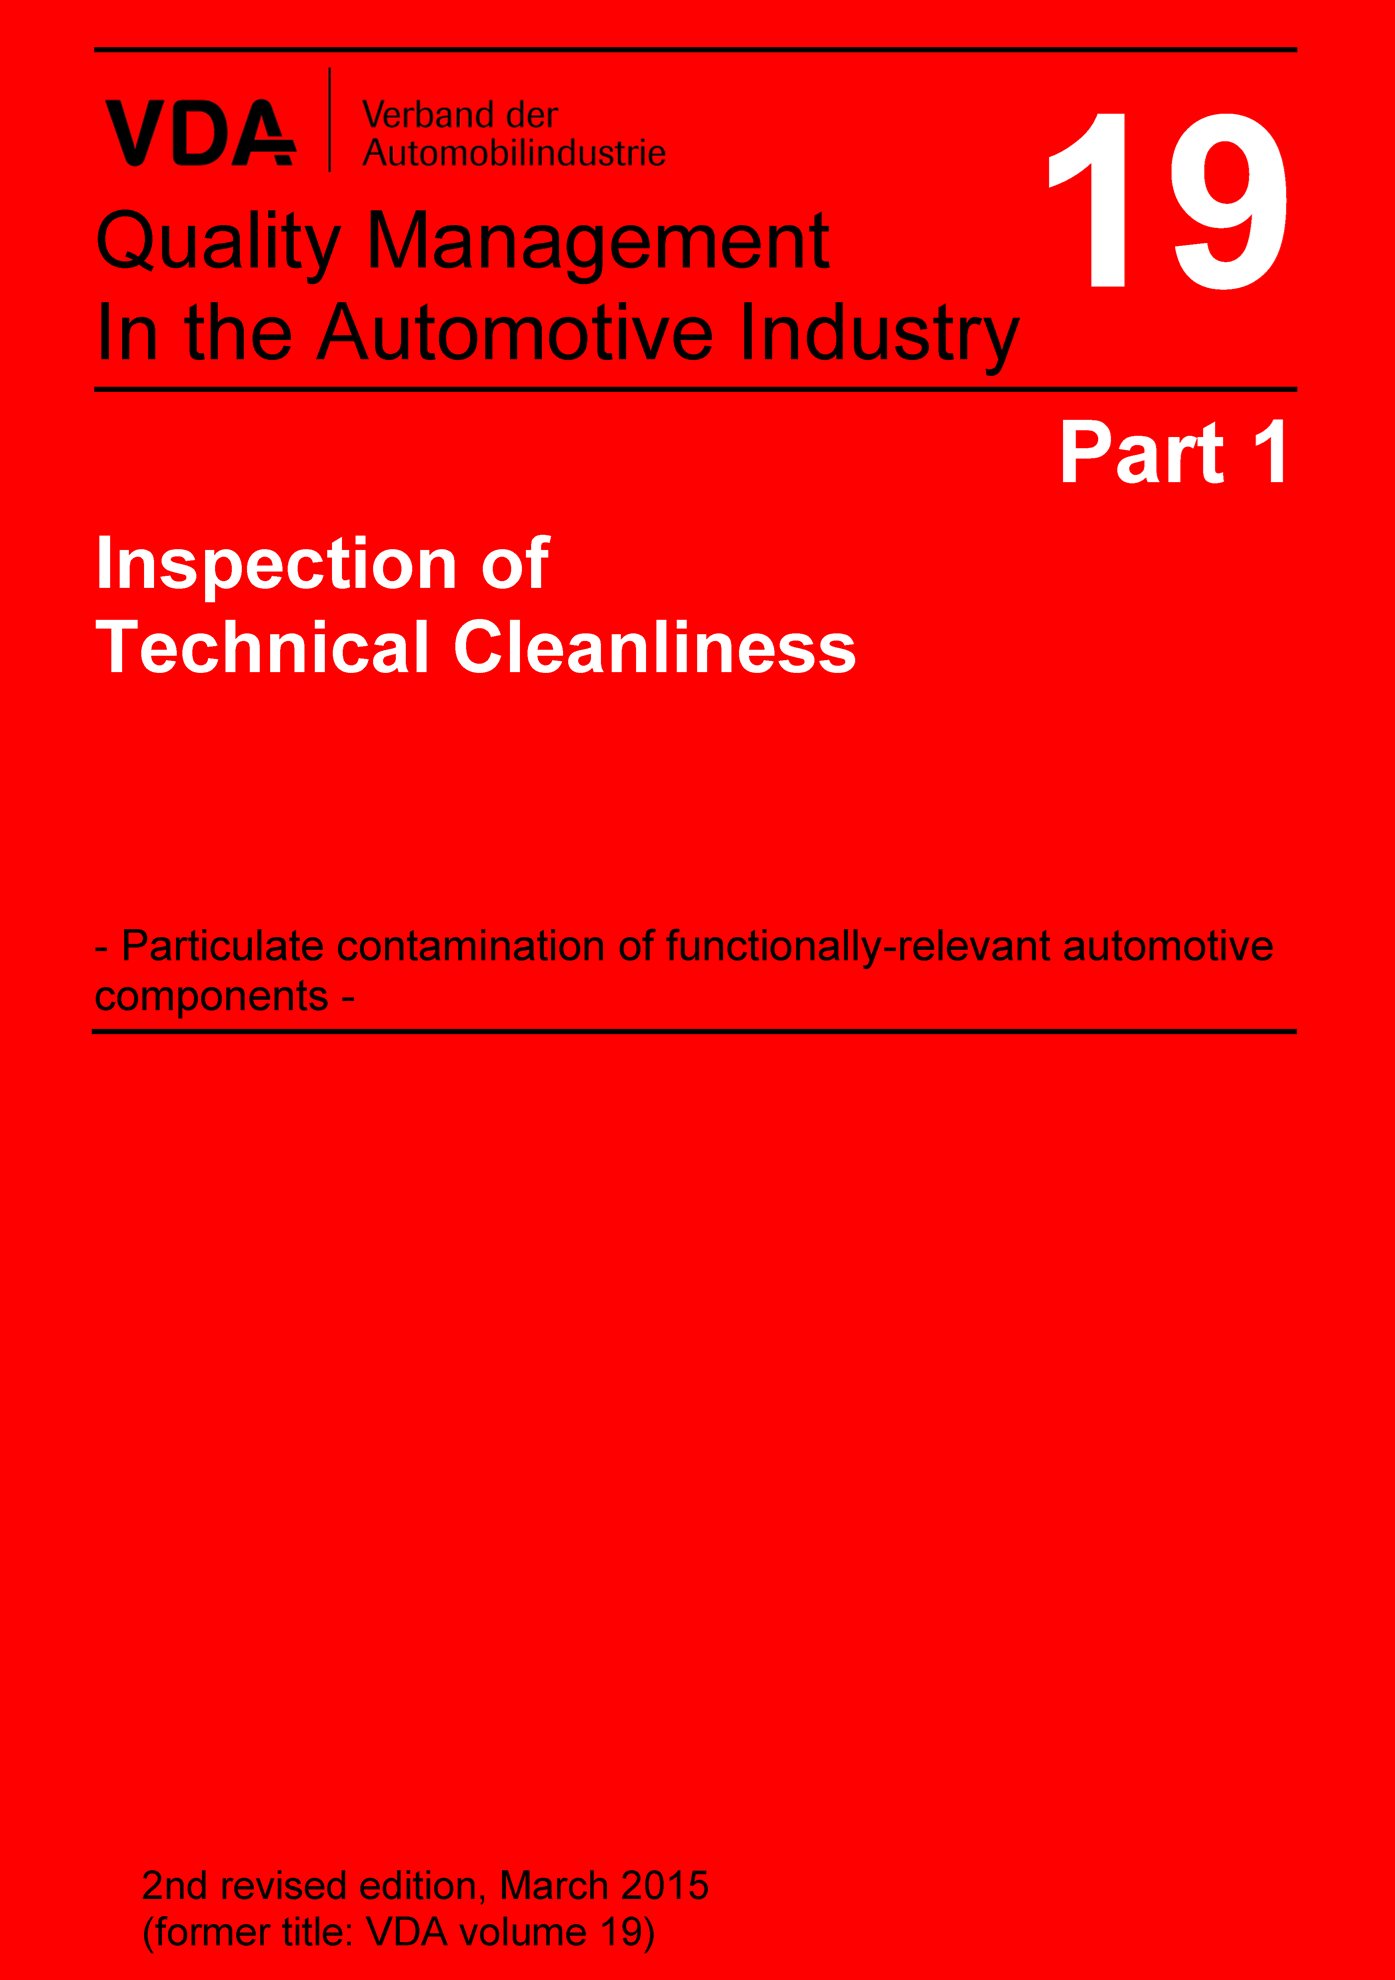 Publikácie  VDA Volume 19 Part 1, Inspection of Technical Cleanliness >Particulate Contamination of Functionally Relevant Automotive Components / 2nd Revised Edition, March 2015 (former title: VDA volume 19) 1.3.2015 náhľad